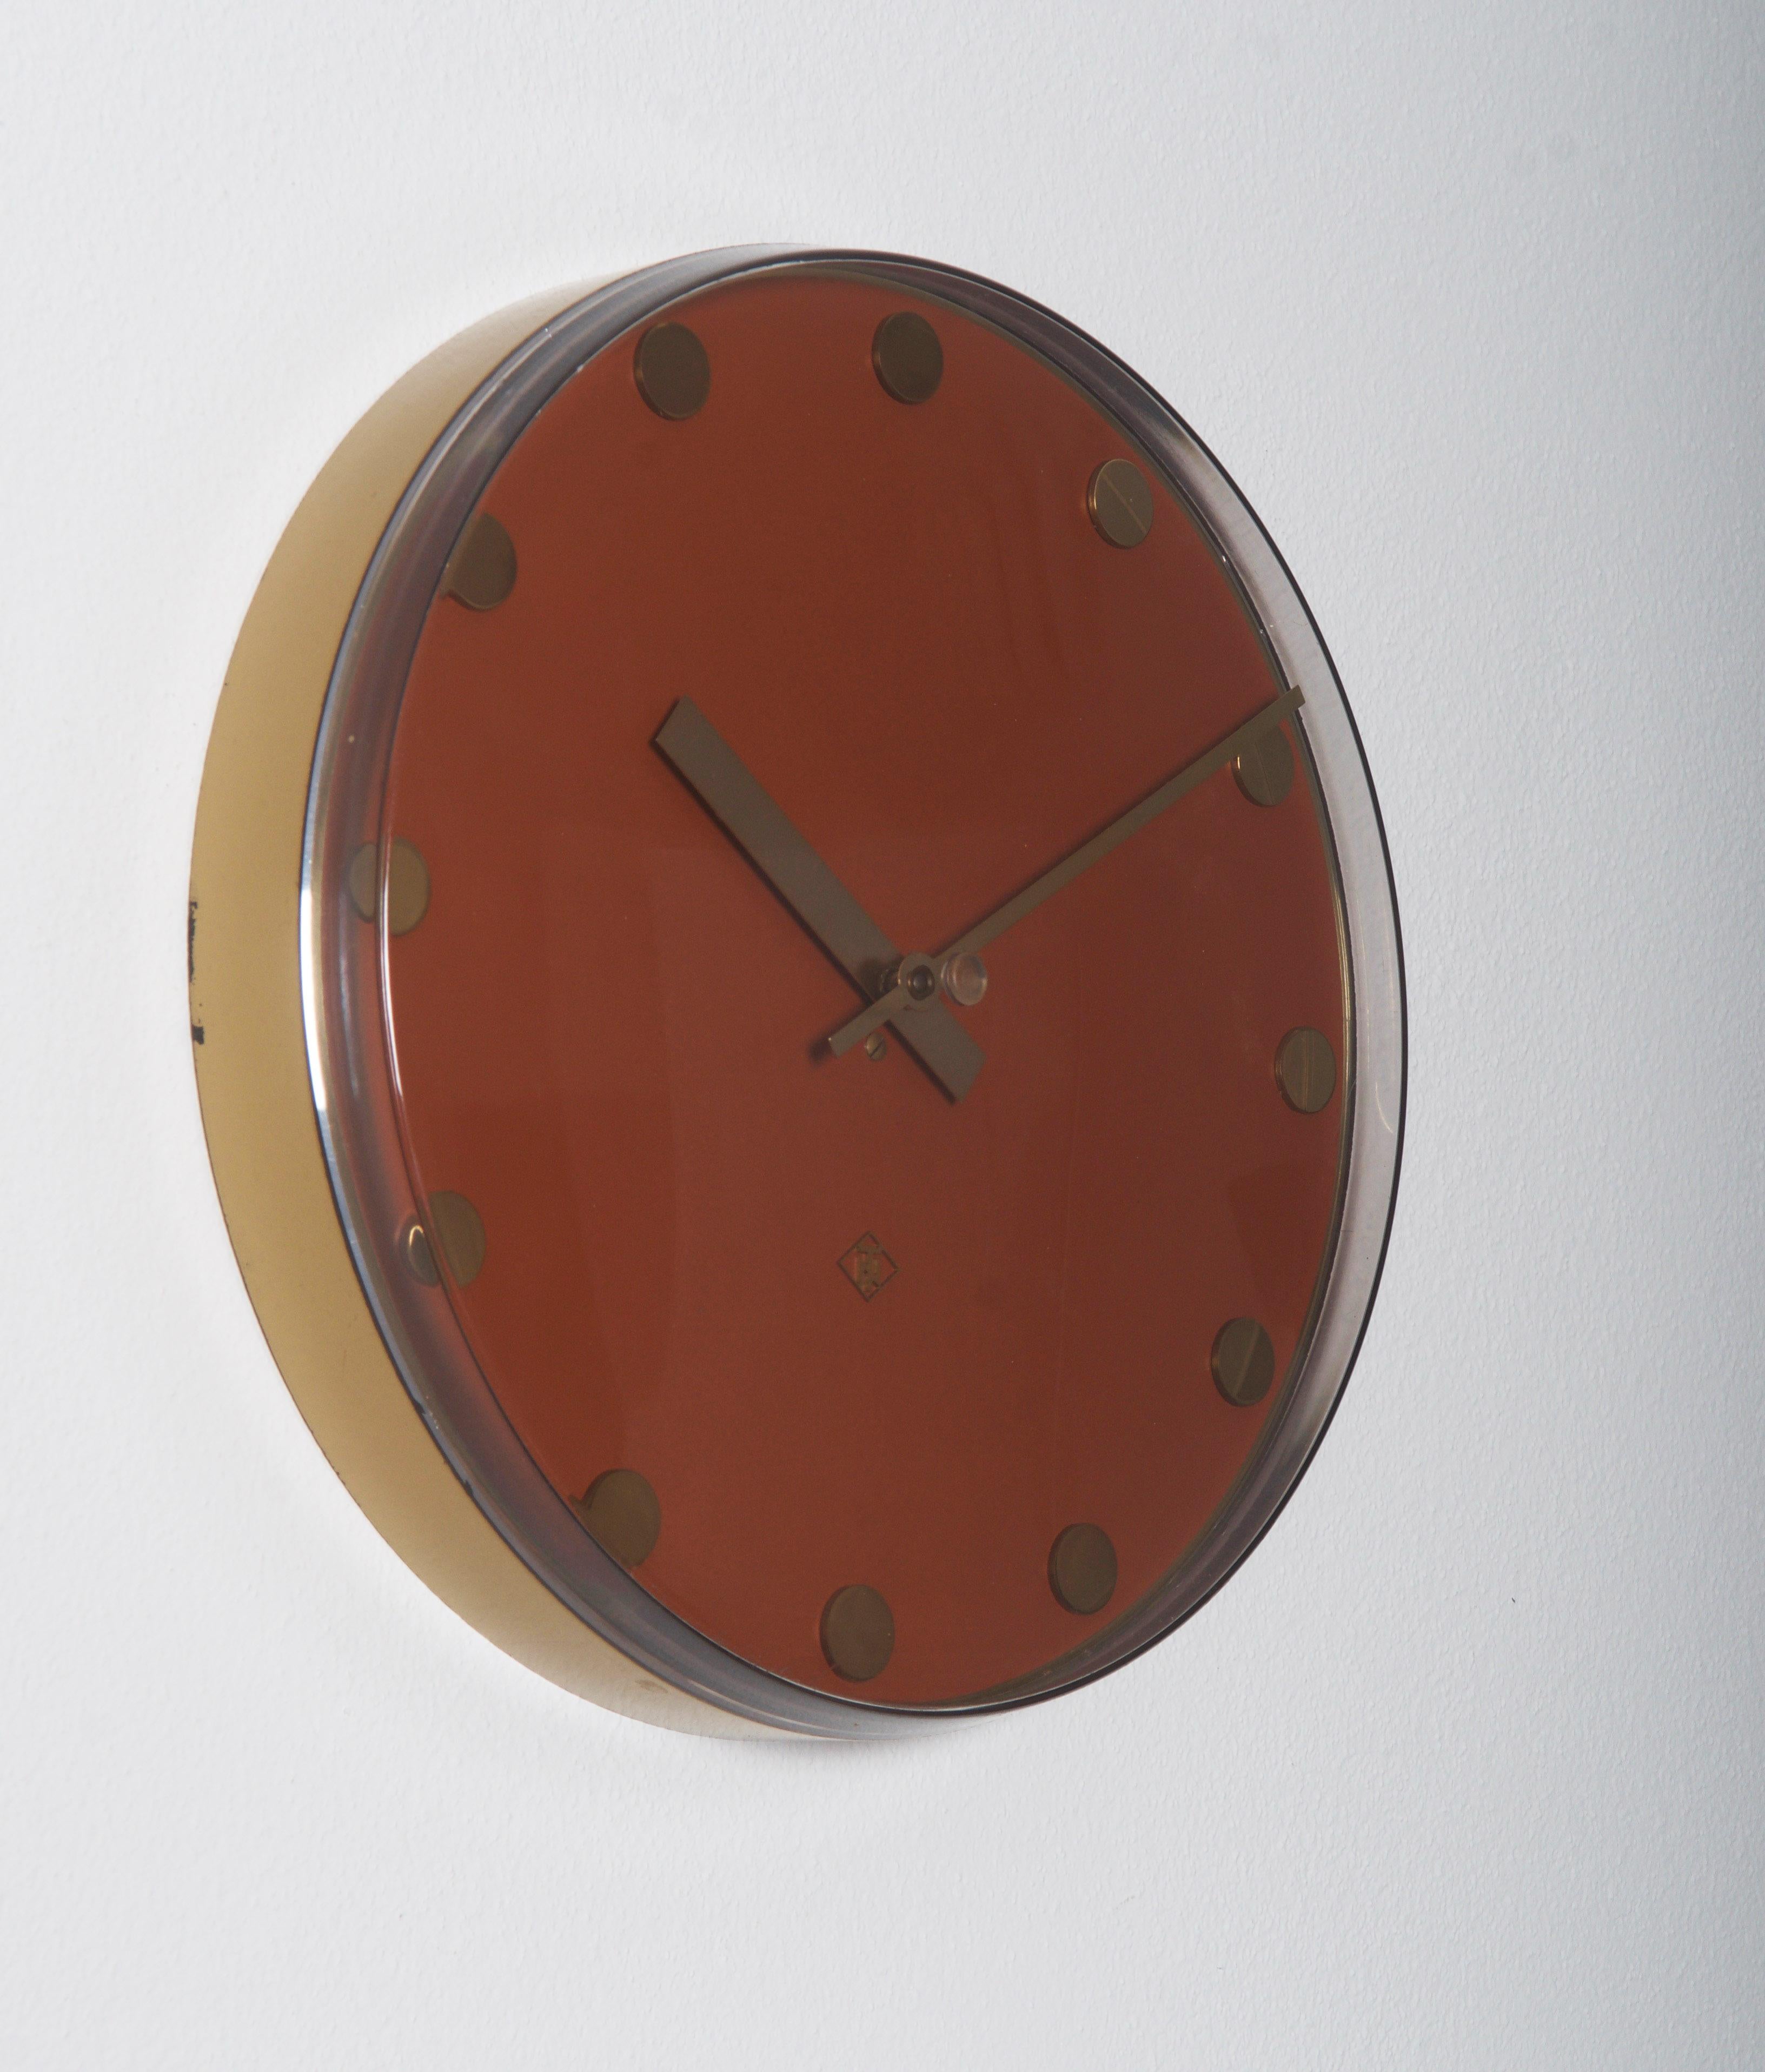 Body made of steel with plexiglas clock face and brass clock hands made by TN Telenorma in the late 1970s. 
Formerly a station or factory slave clock, it is now fitted with a modern quartz movement with a battery.
Delivery time 2-3 weeks.